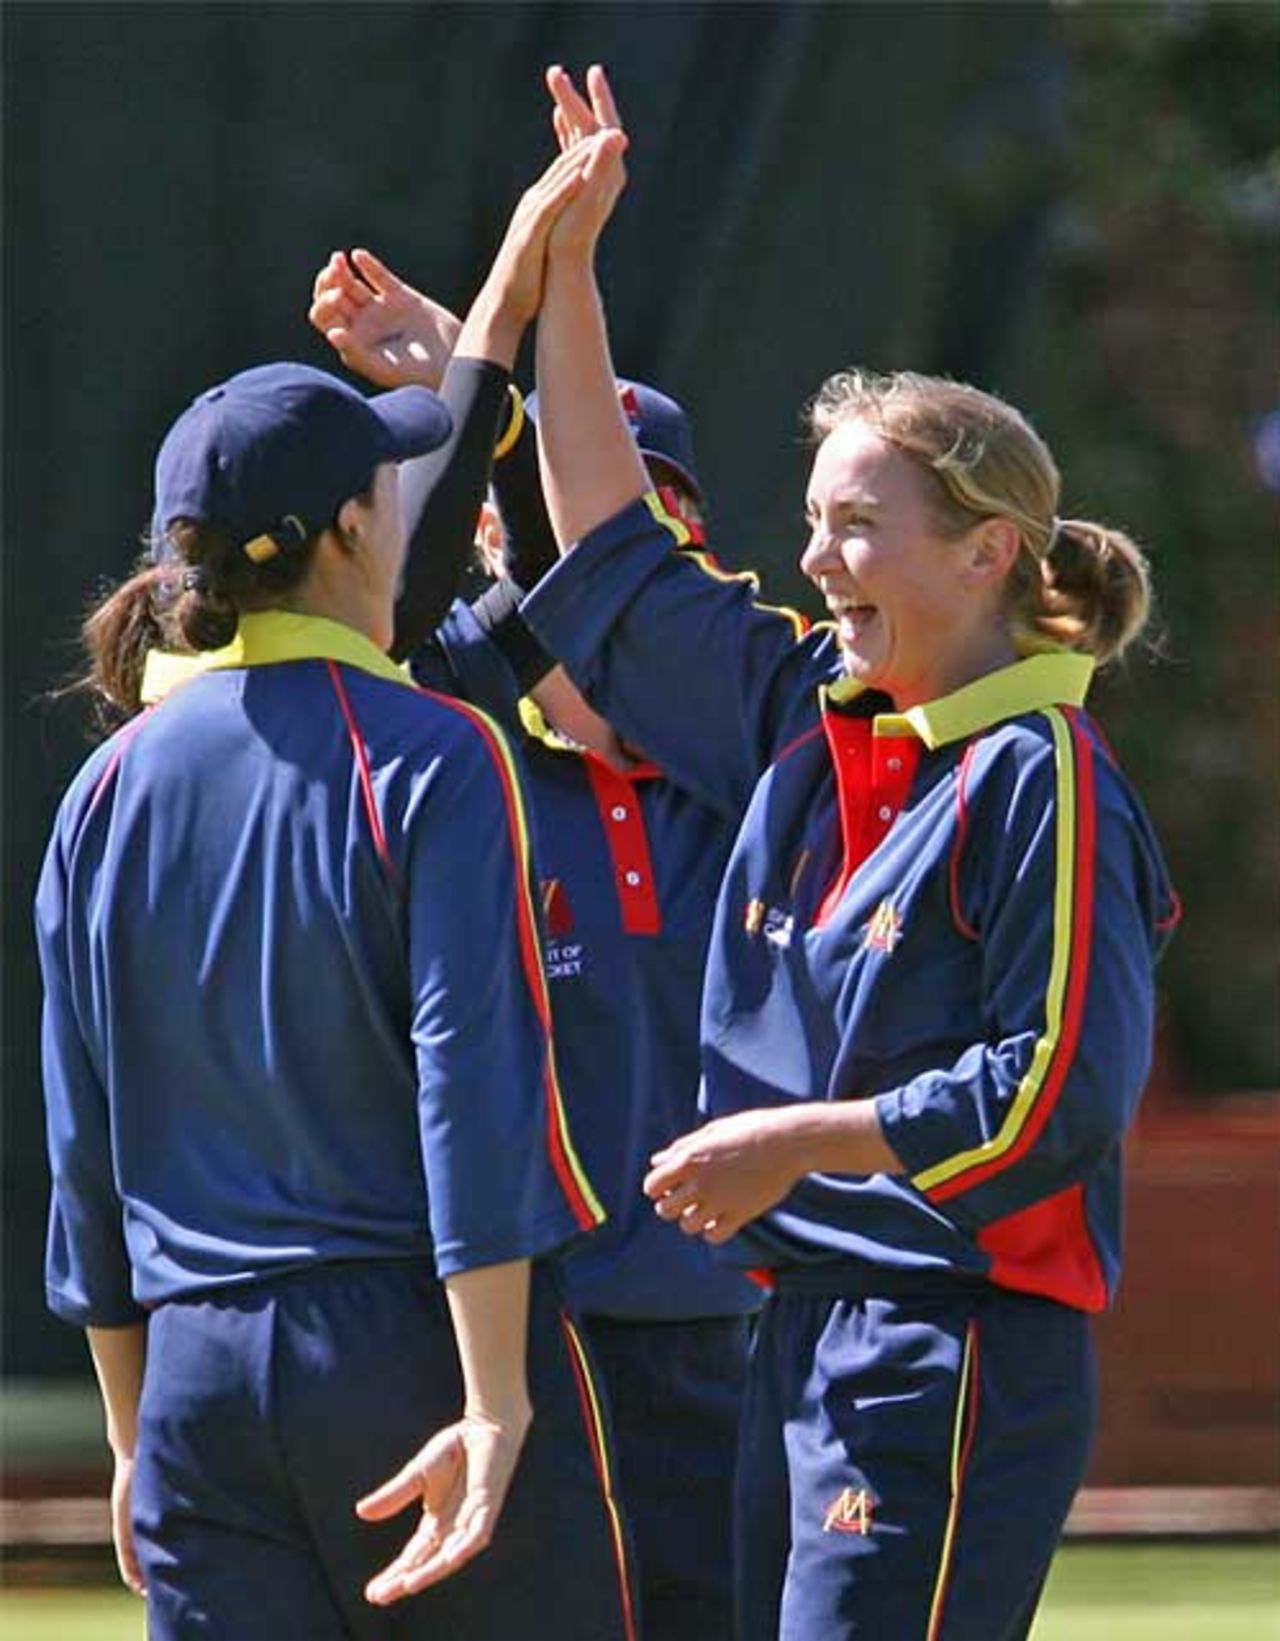 Beth Morgan is in the wickets for MCC, MCC Invitational XI v New Zealand, 50-over match, 8 August 2007, Taunton